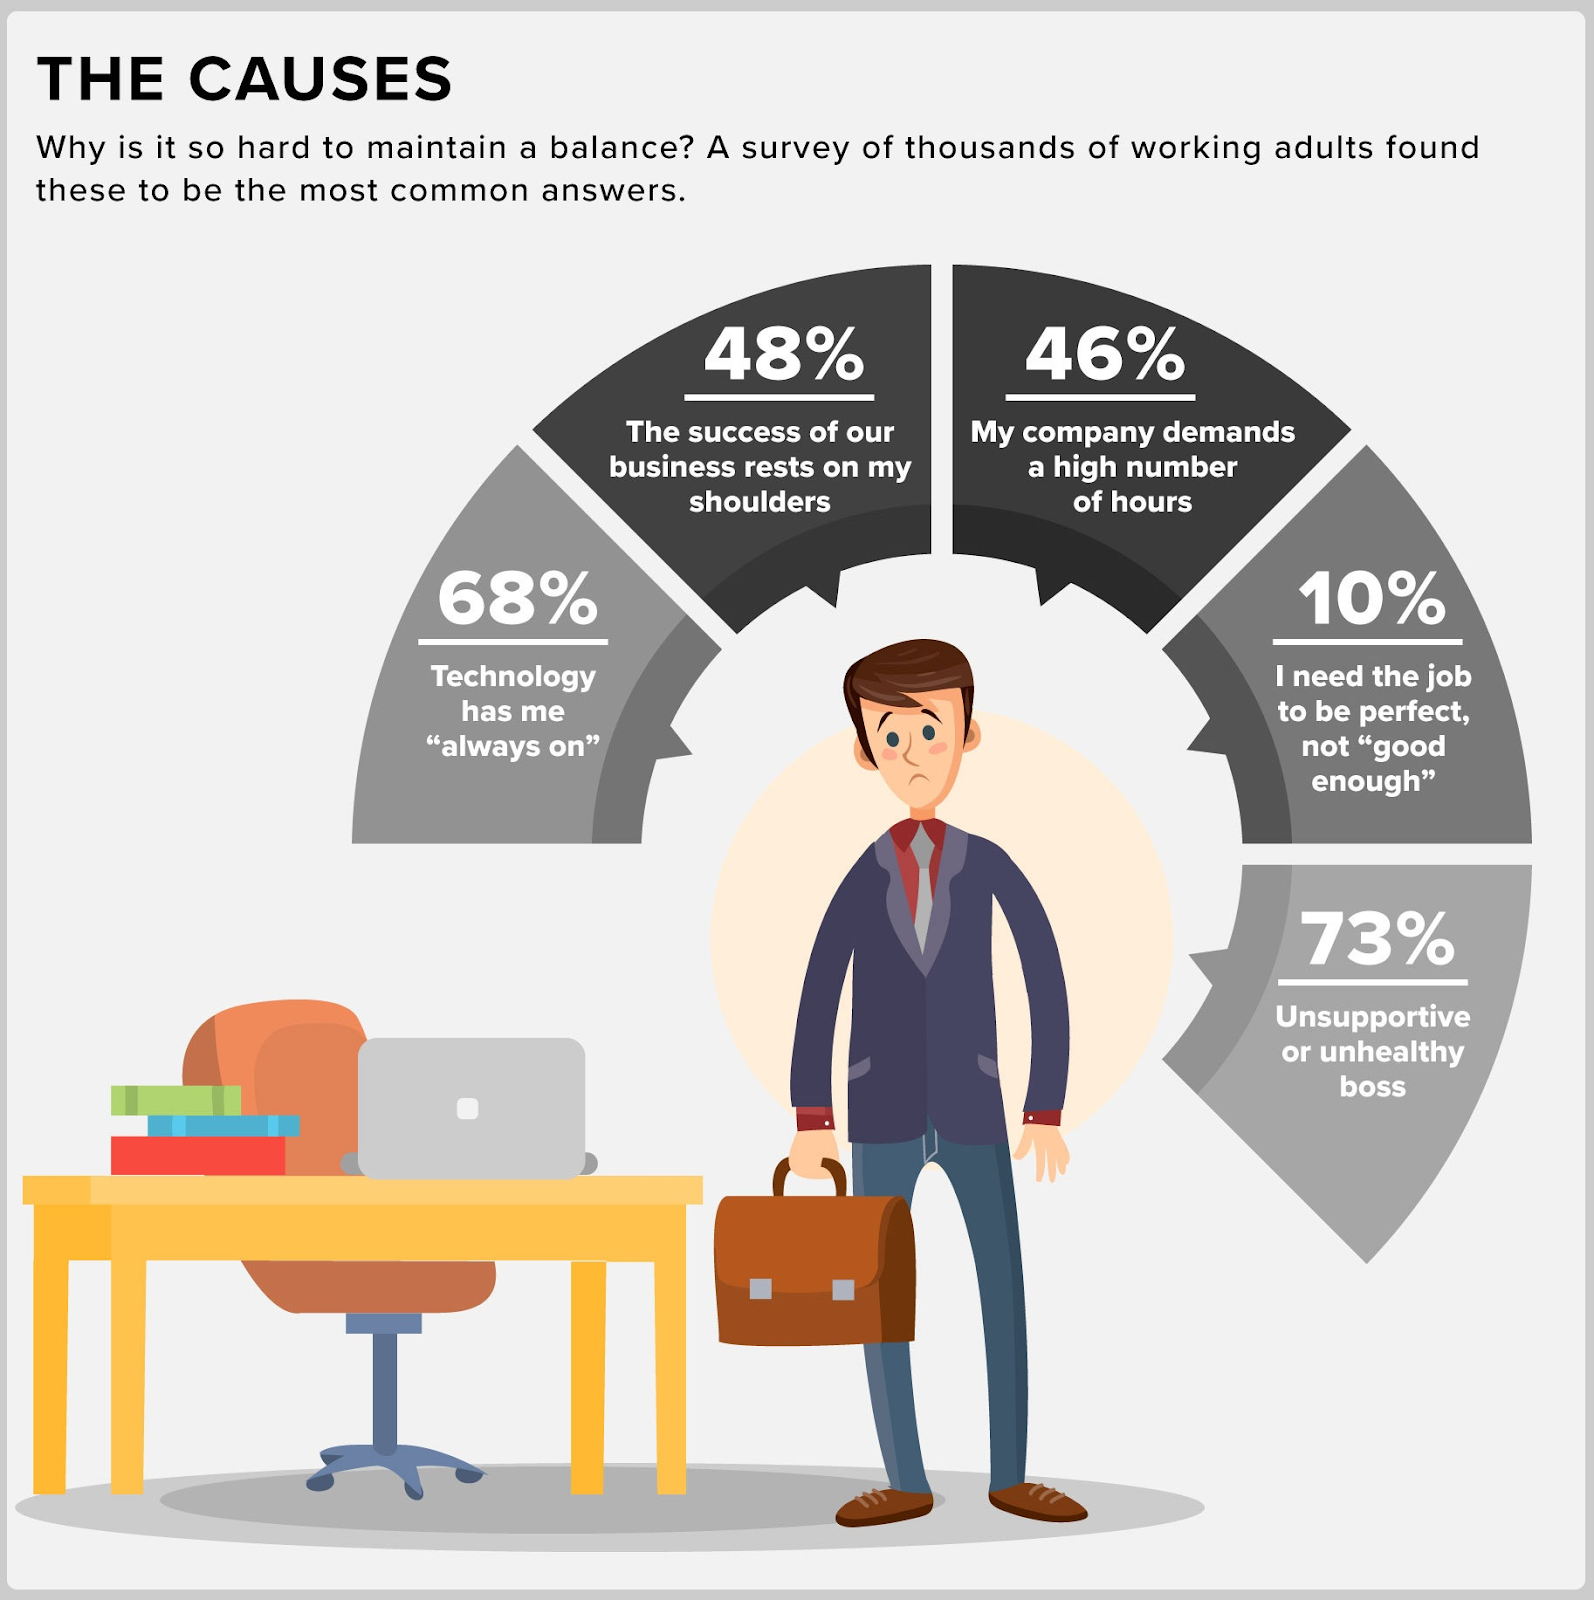 A drawing of a business man looking sad as he stands at his desk. A grey semi-circle looms over head with statistics: 68% say technology has them "always on" 48% say the success of their business rests on their shoulders 46% say their company demands a high number of hours 10% say they need the job to be perfect, not just "good enough" 73% say the blame rests on an unsupportive or unhealthy boss